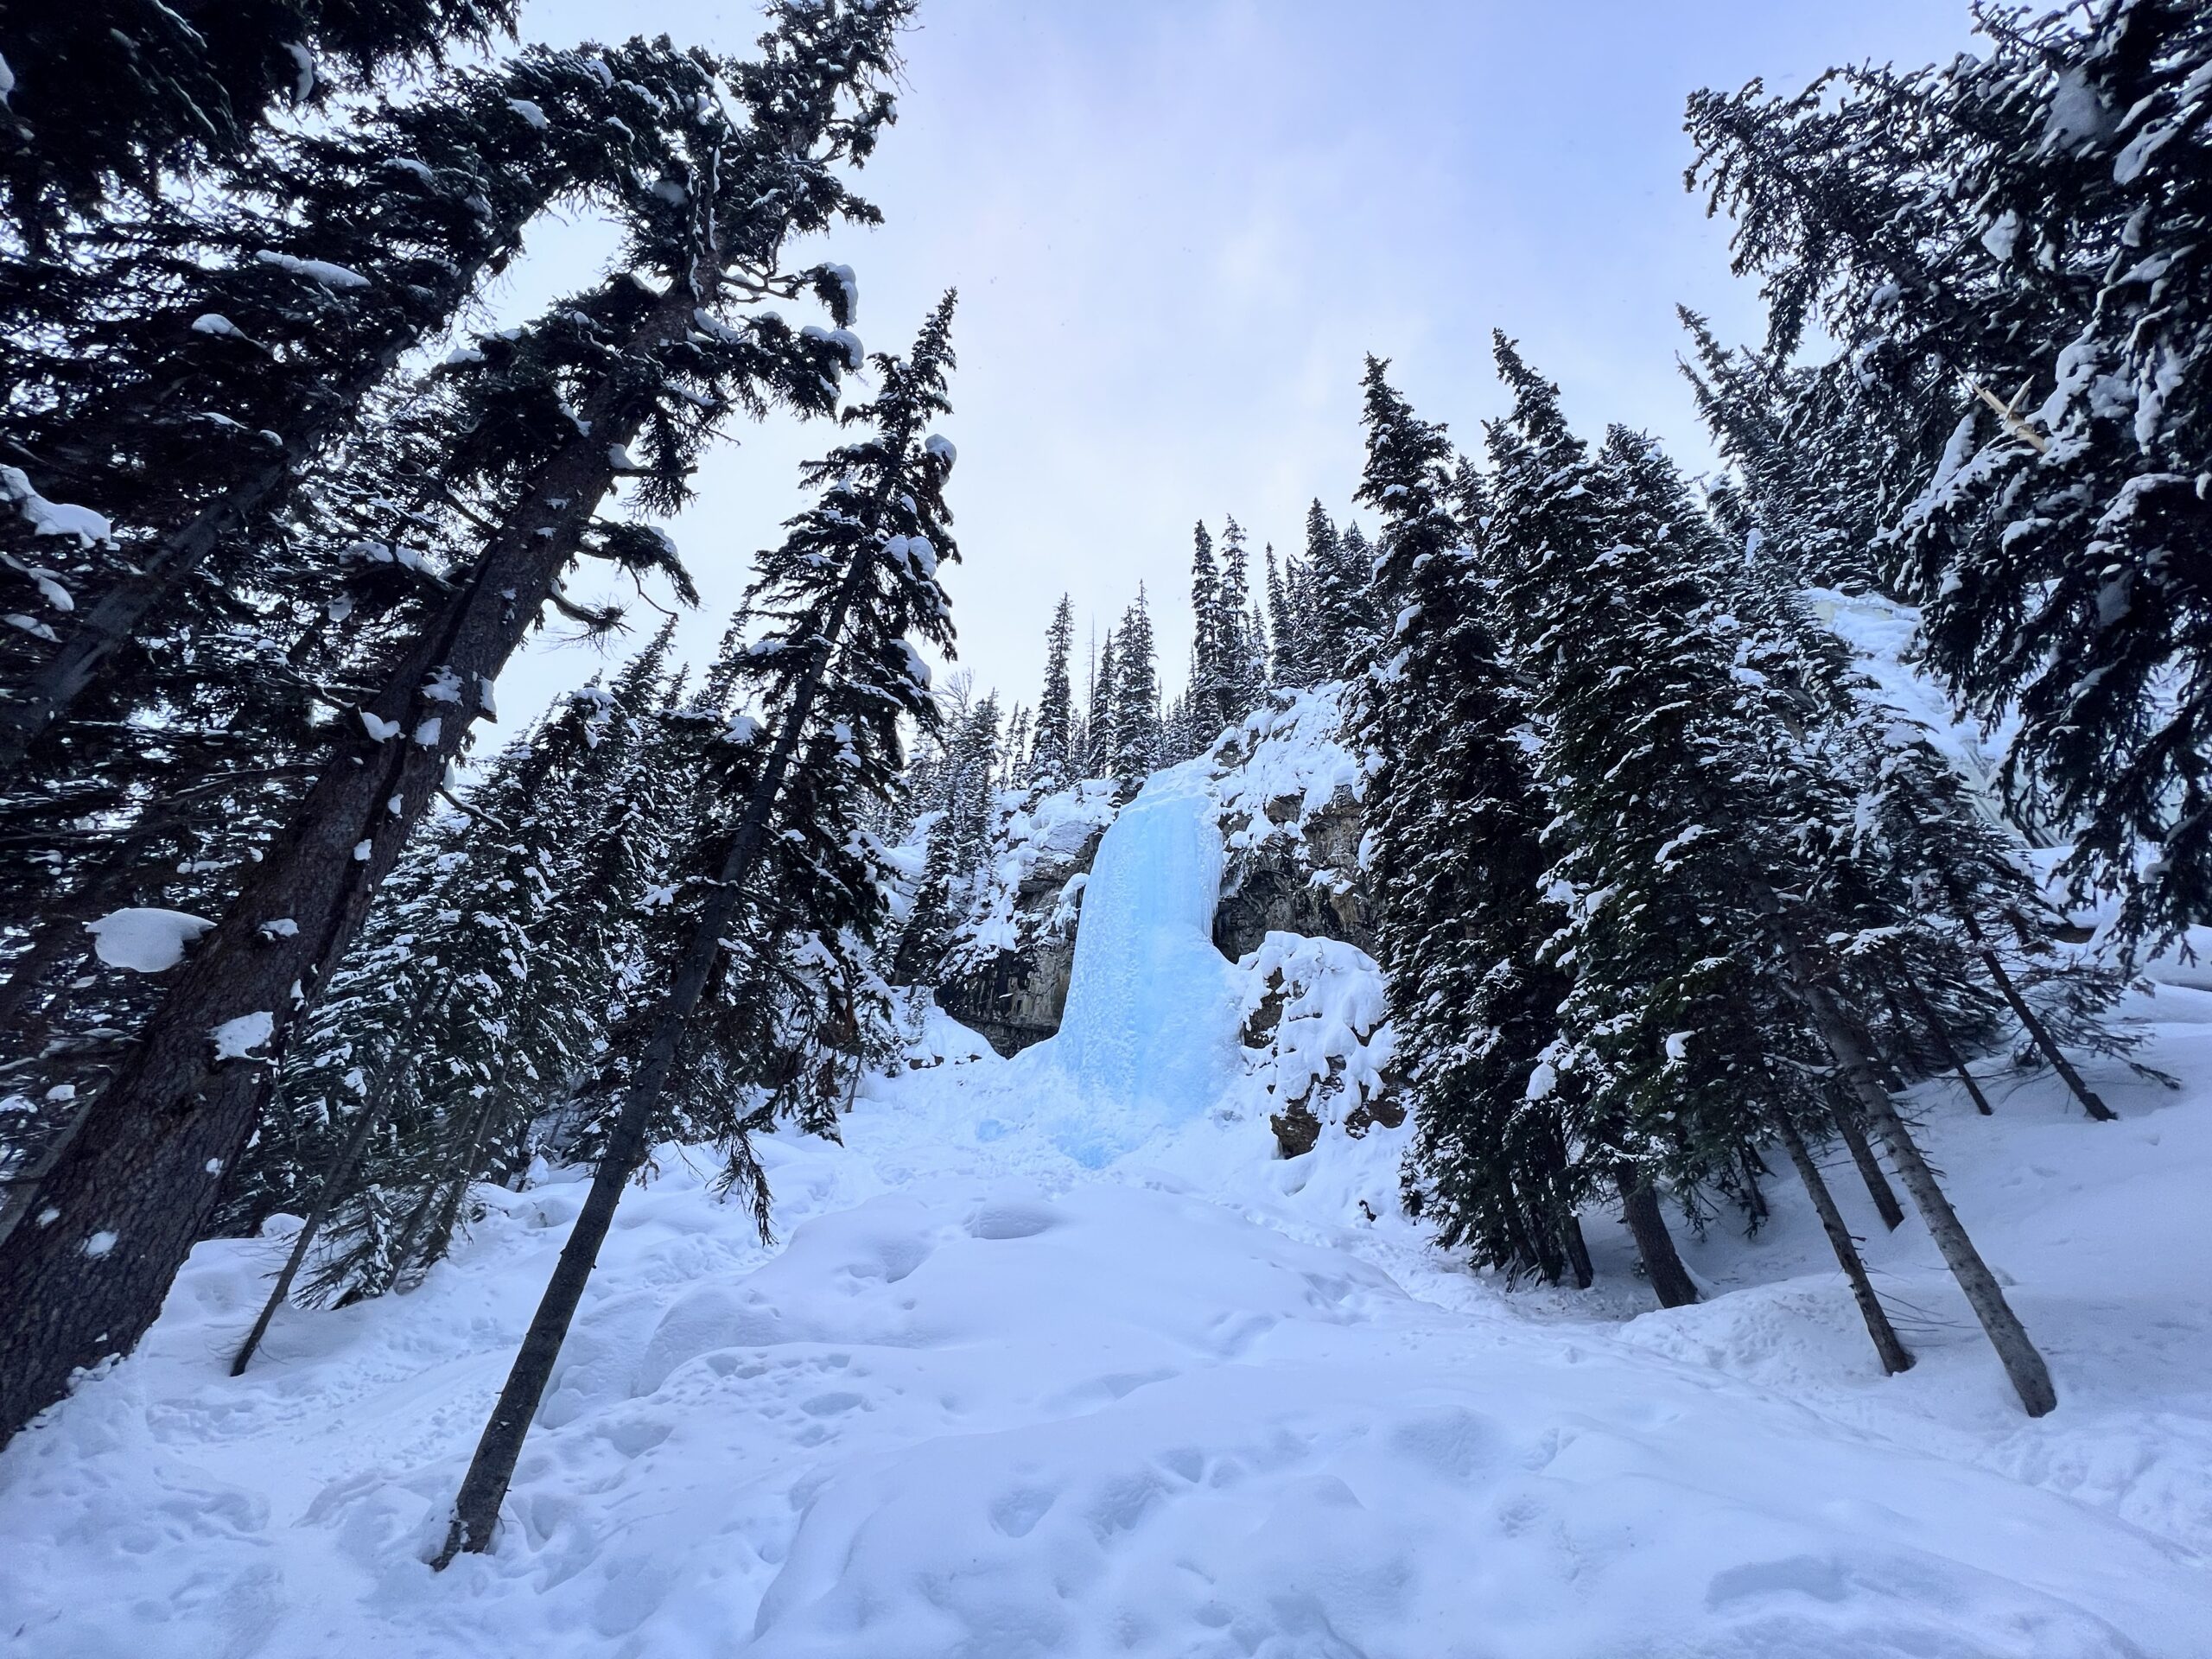 Get truly lost in a snowy wonderland along British Columbia’s Powder Highway